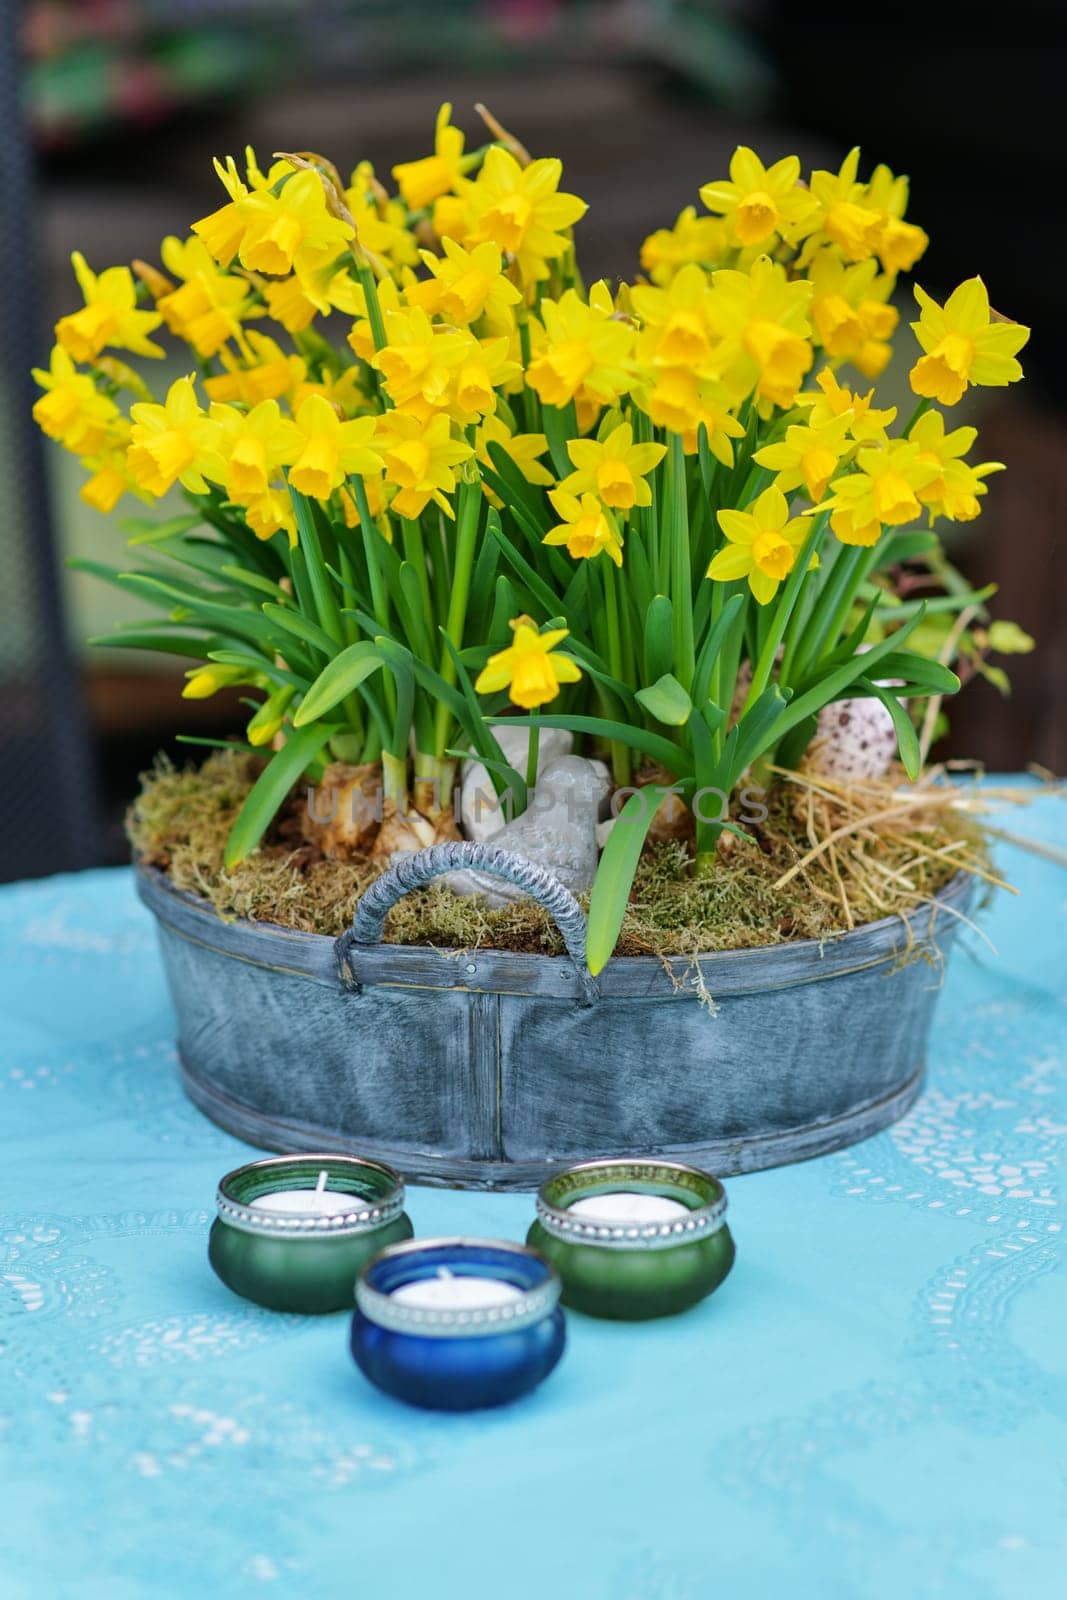 Daffodils with bulbs in a large pot and candles for Easter